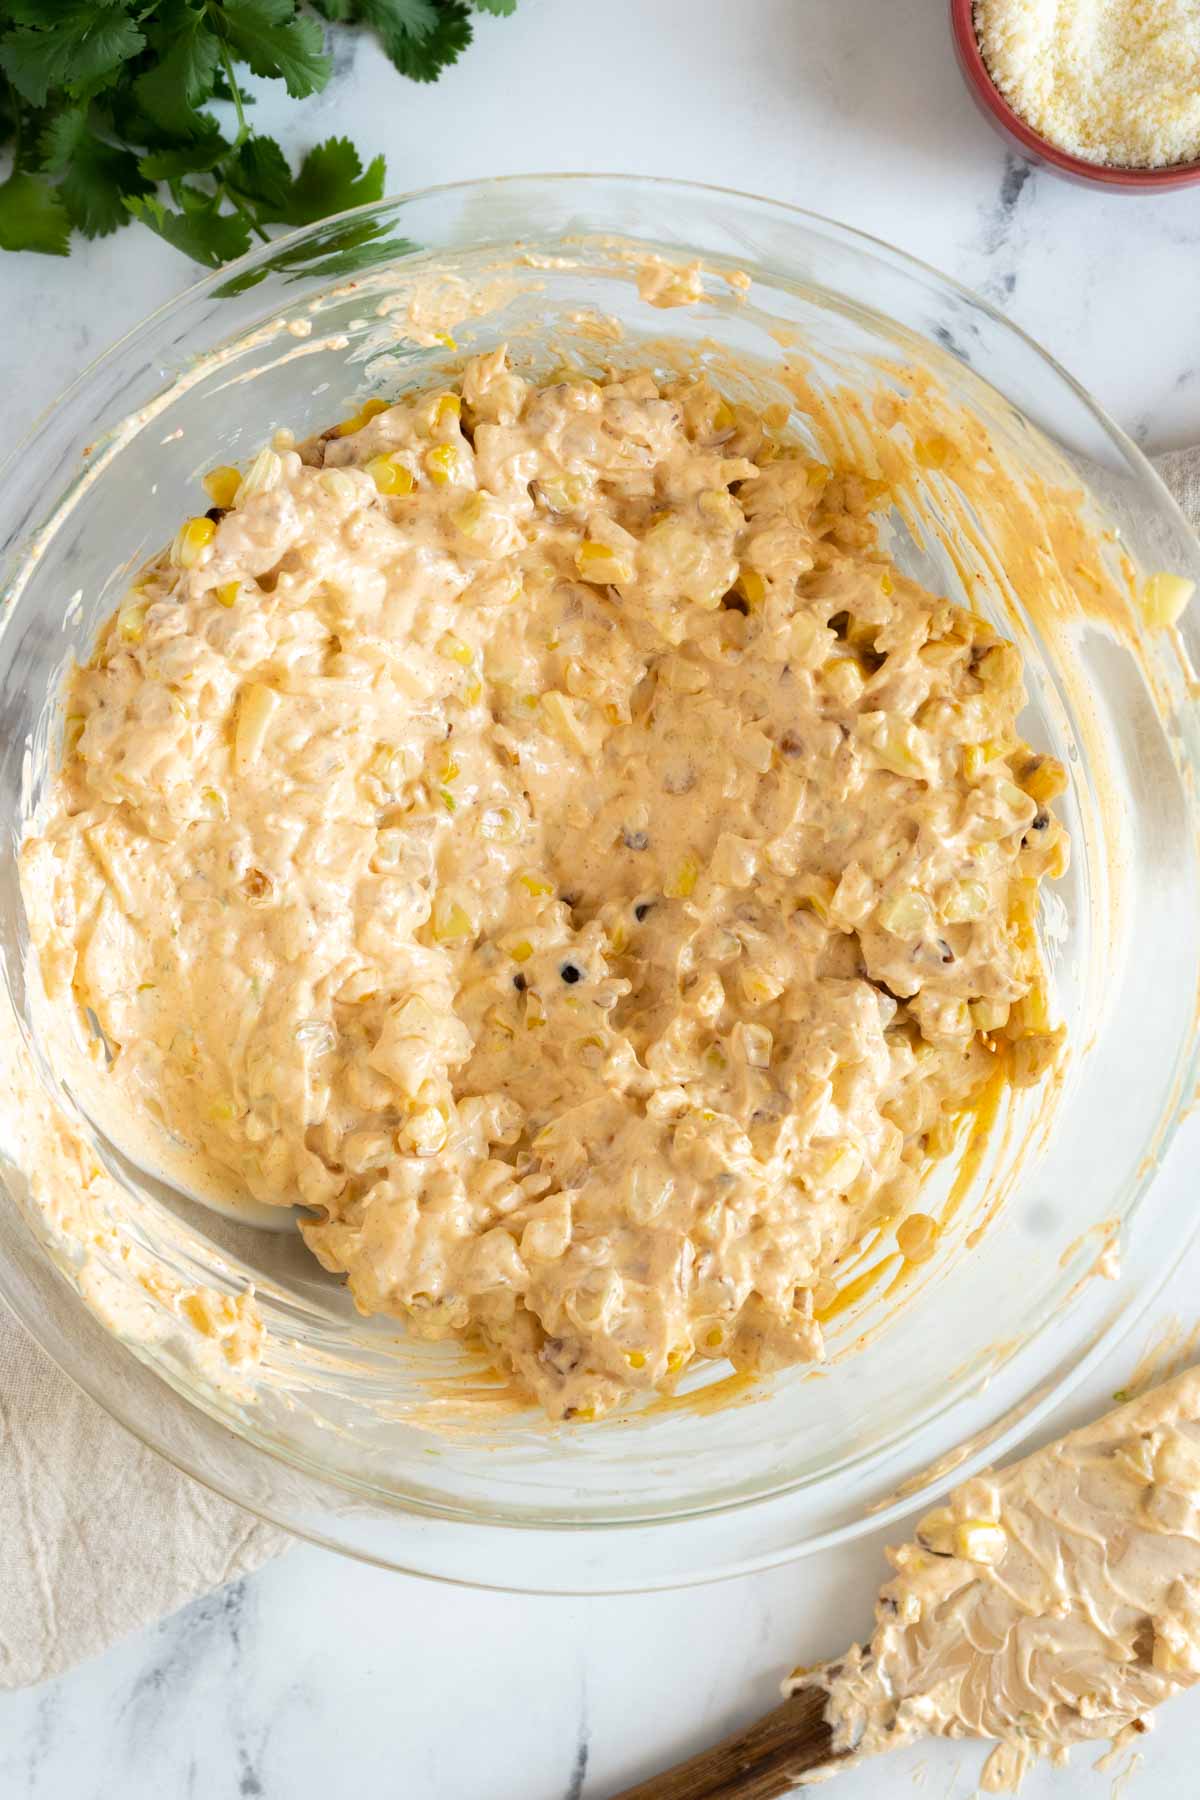 Cream cheese mixture with corn in a mixing bowl.